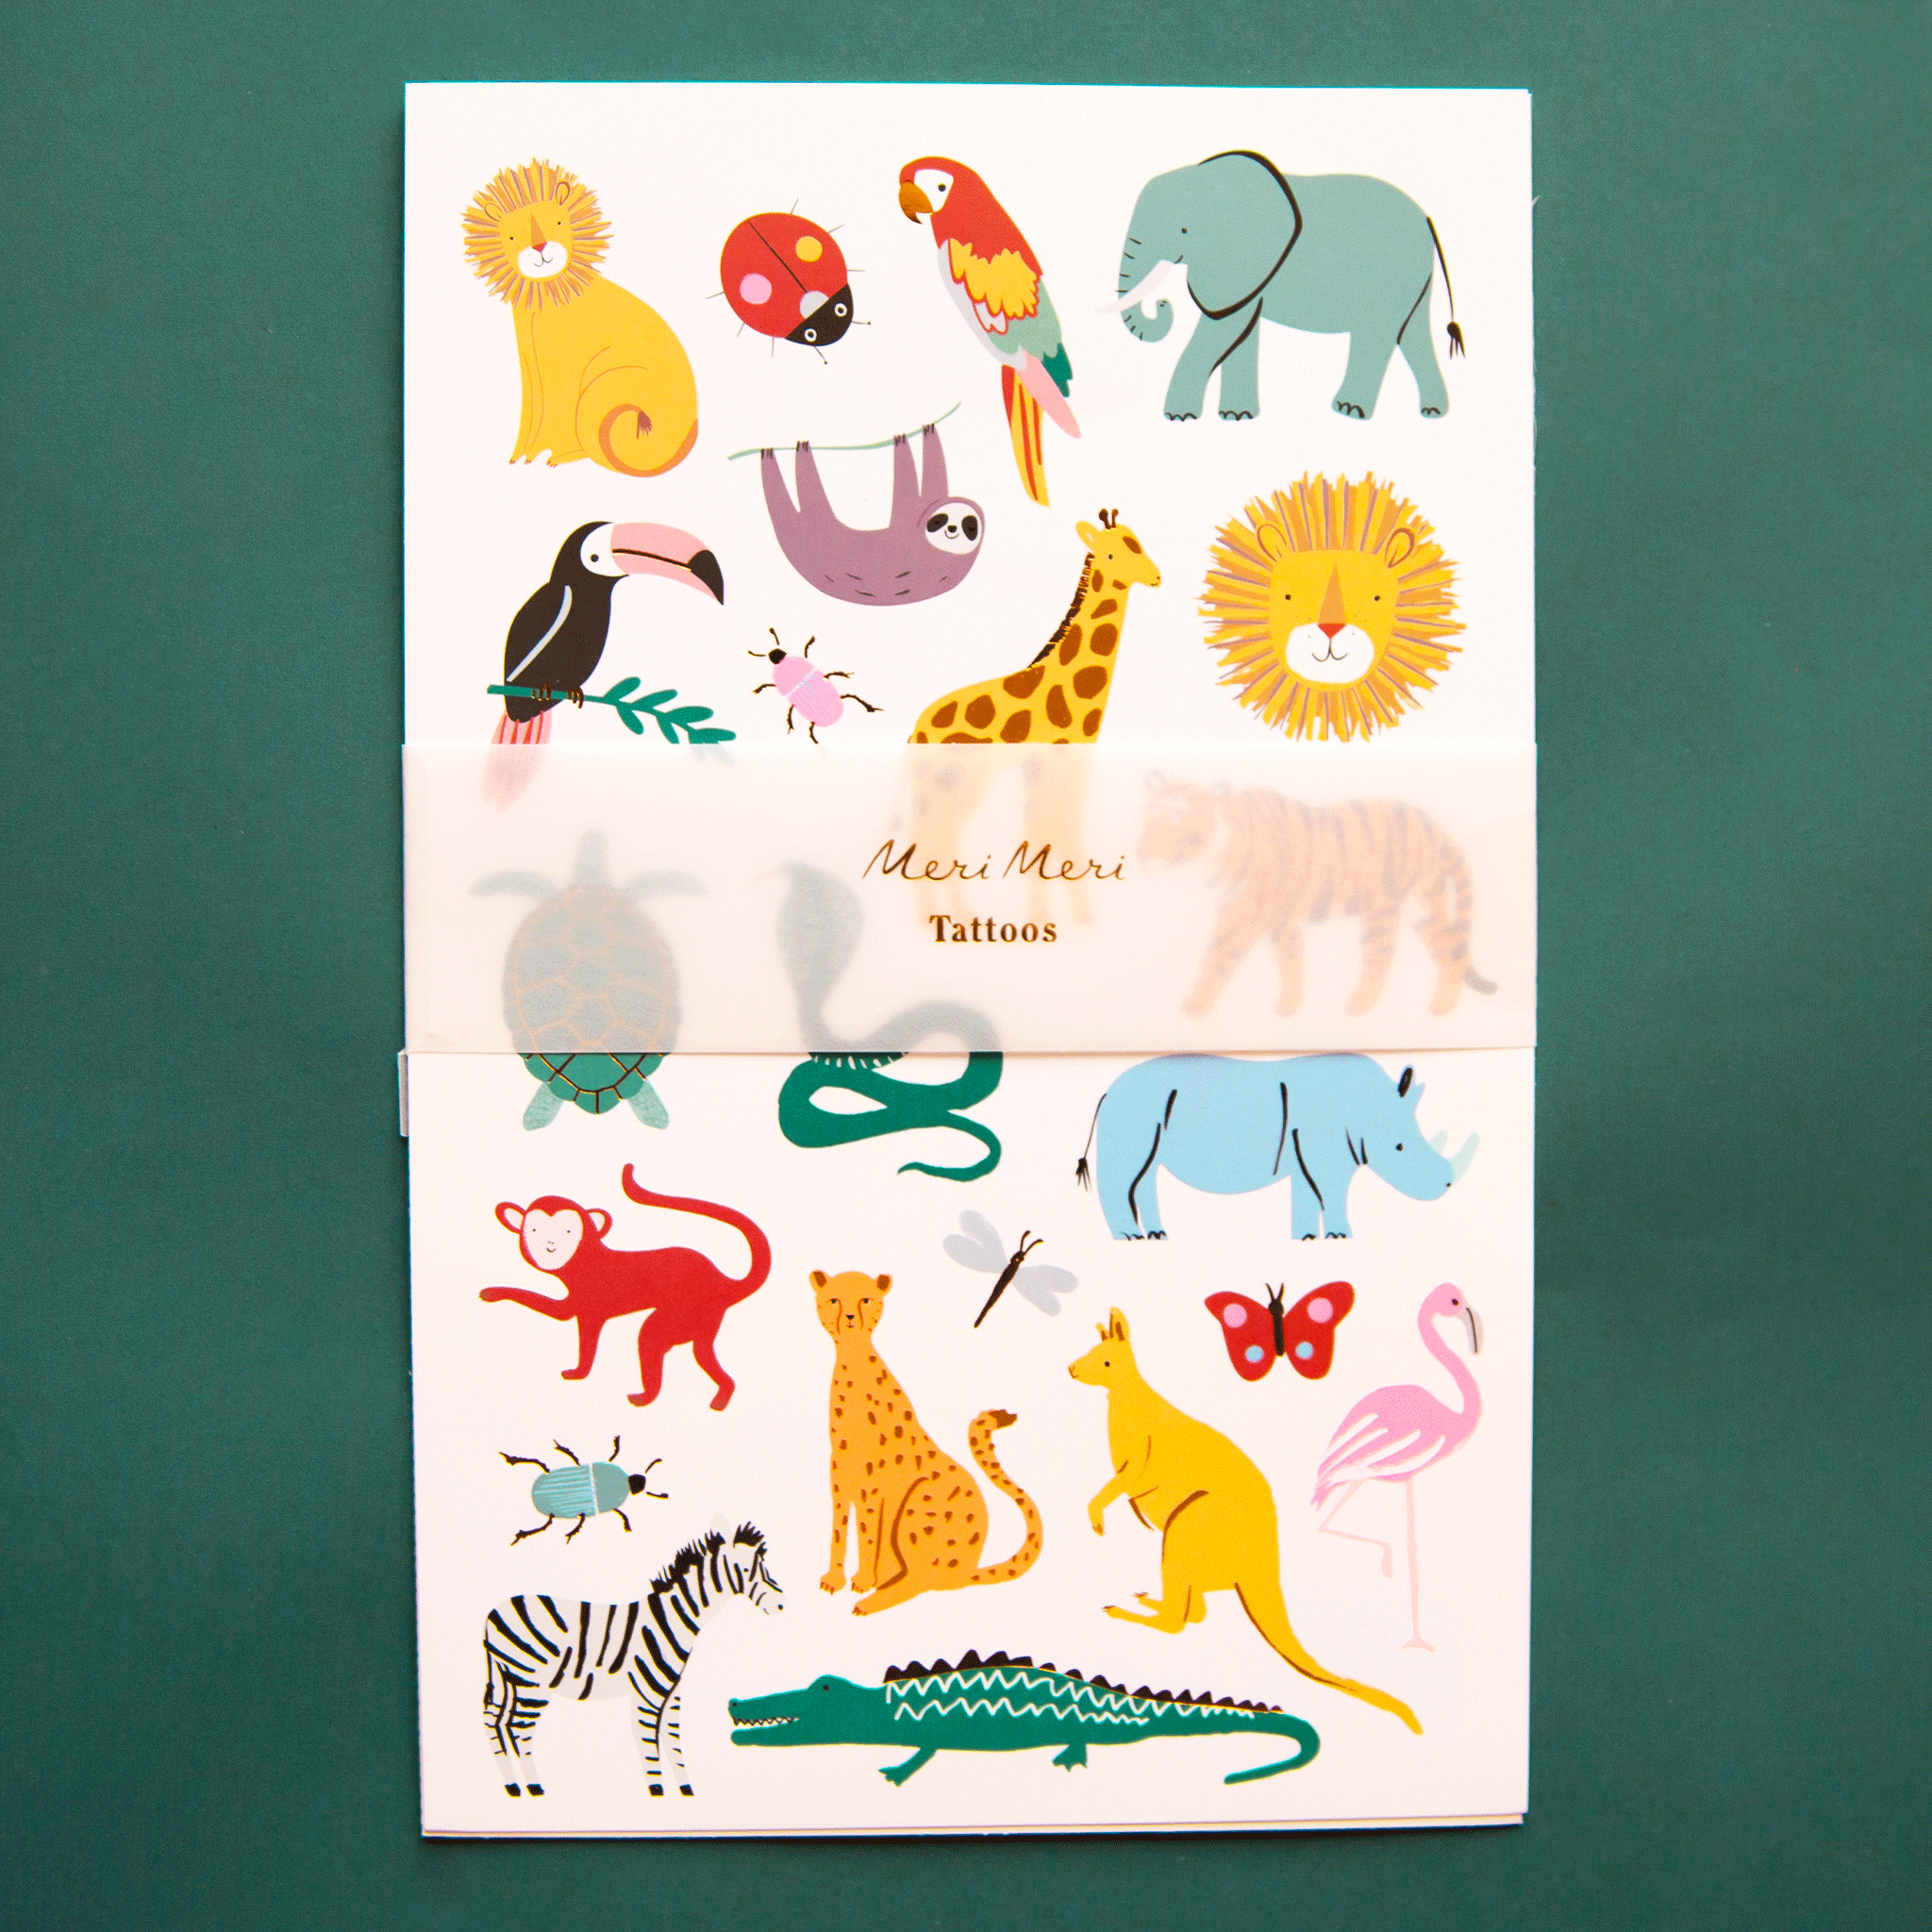 On a green background is a white sheet of temporary tattoos with different animal shapes. 